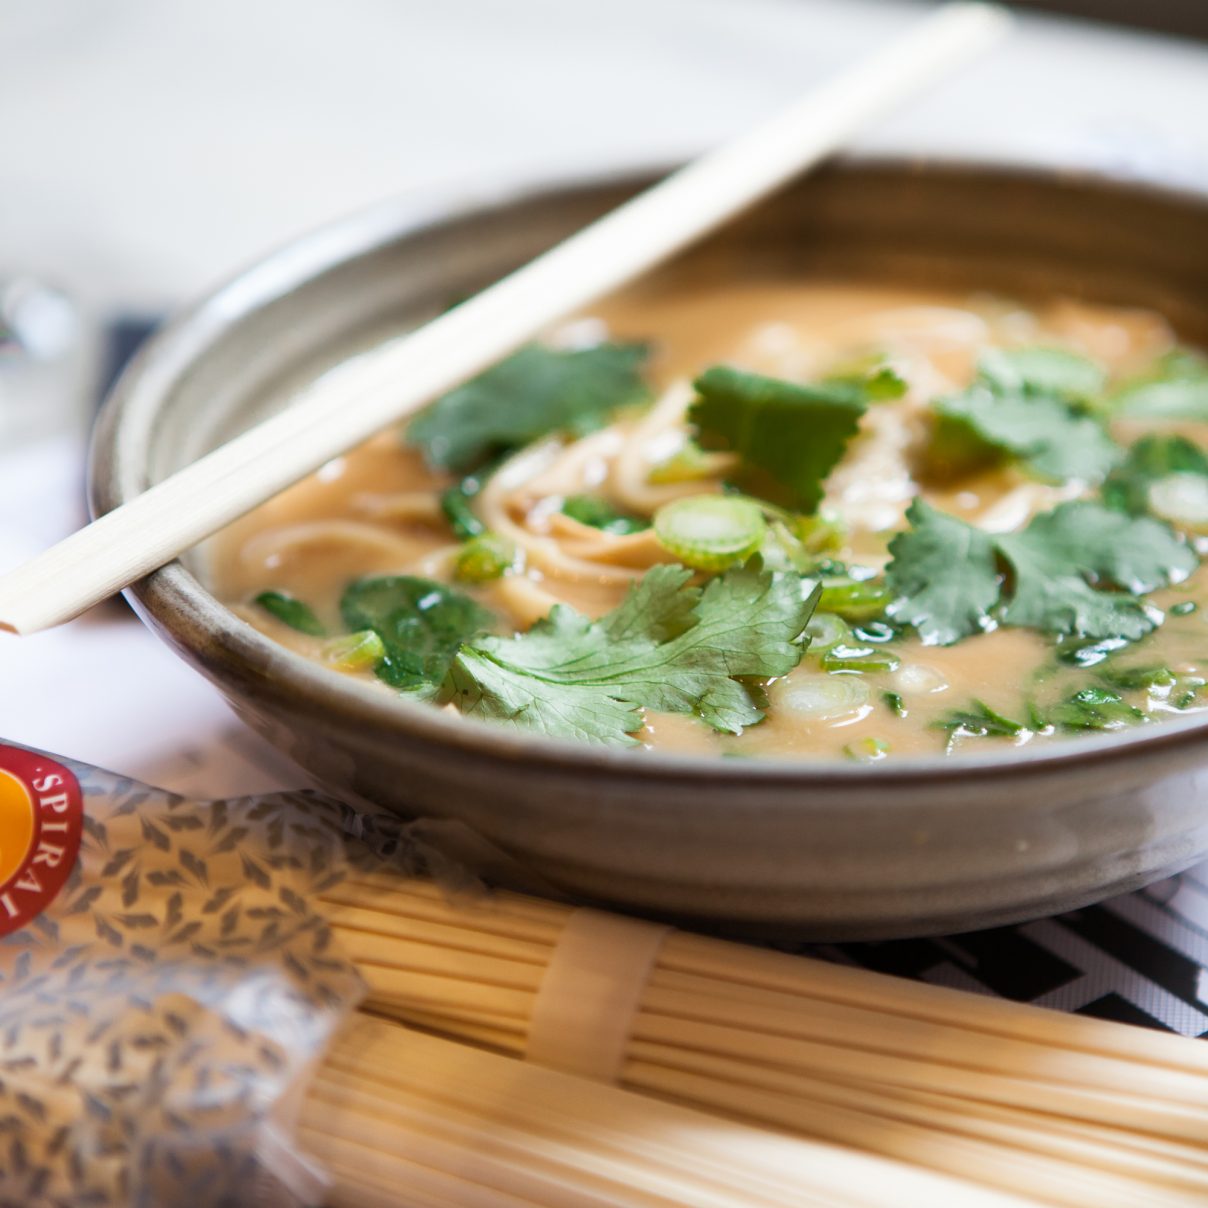 Roast Cauliflower Miso Soup with Shredded Roast Chicken & Udon Noodles